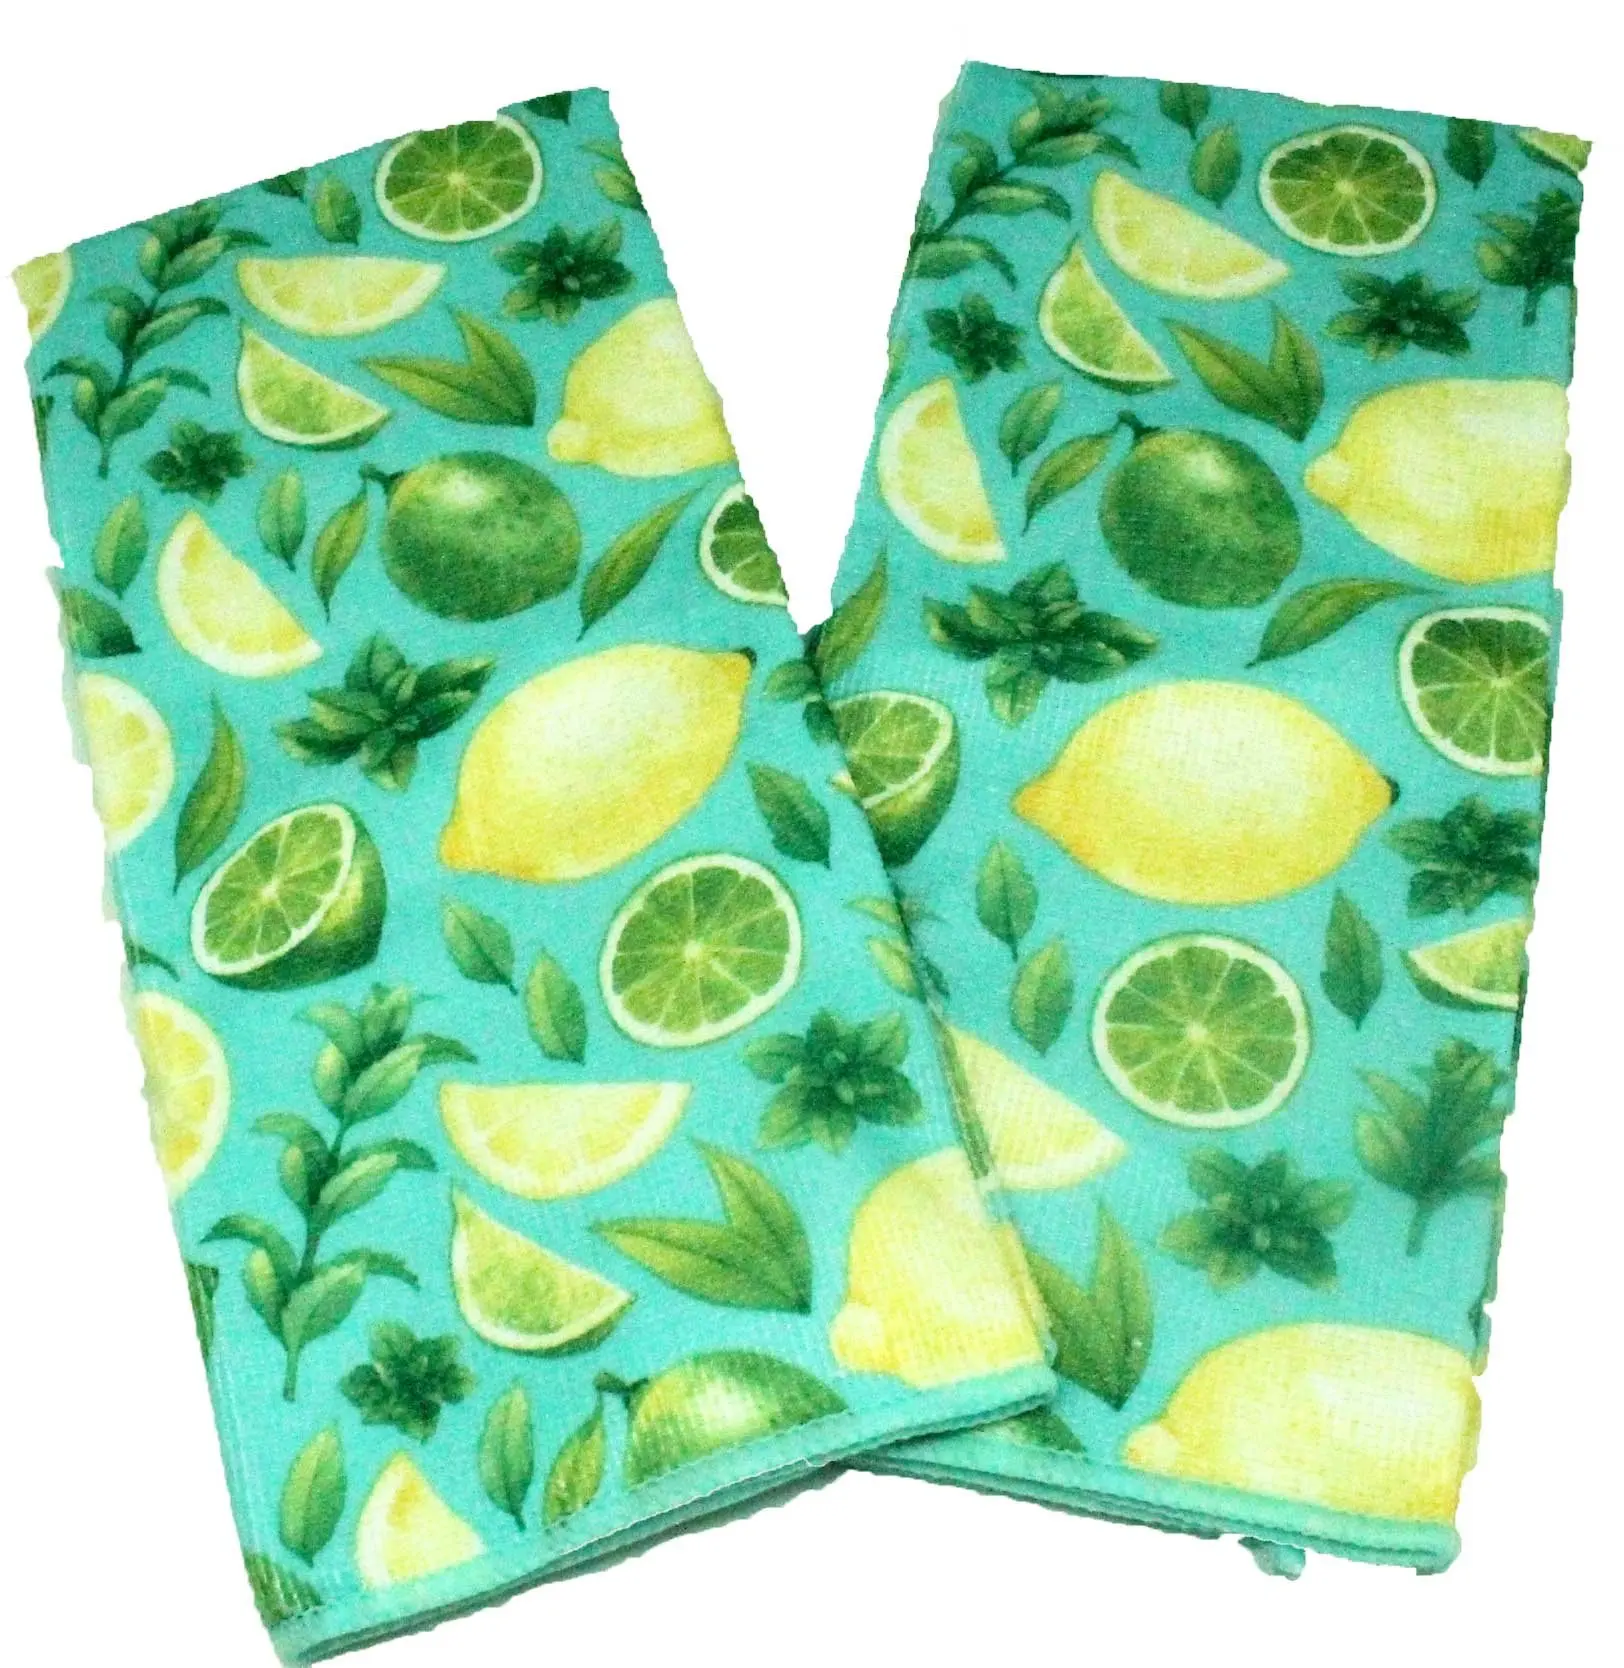 Set of 2 Yellow and Teal Kitchen Dish Towels Microfiber Dish Towels Gift Set with Baking and Cooking Utensils Design Comes in Organza Gift Bag